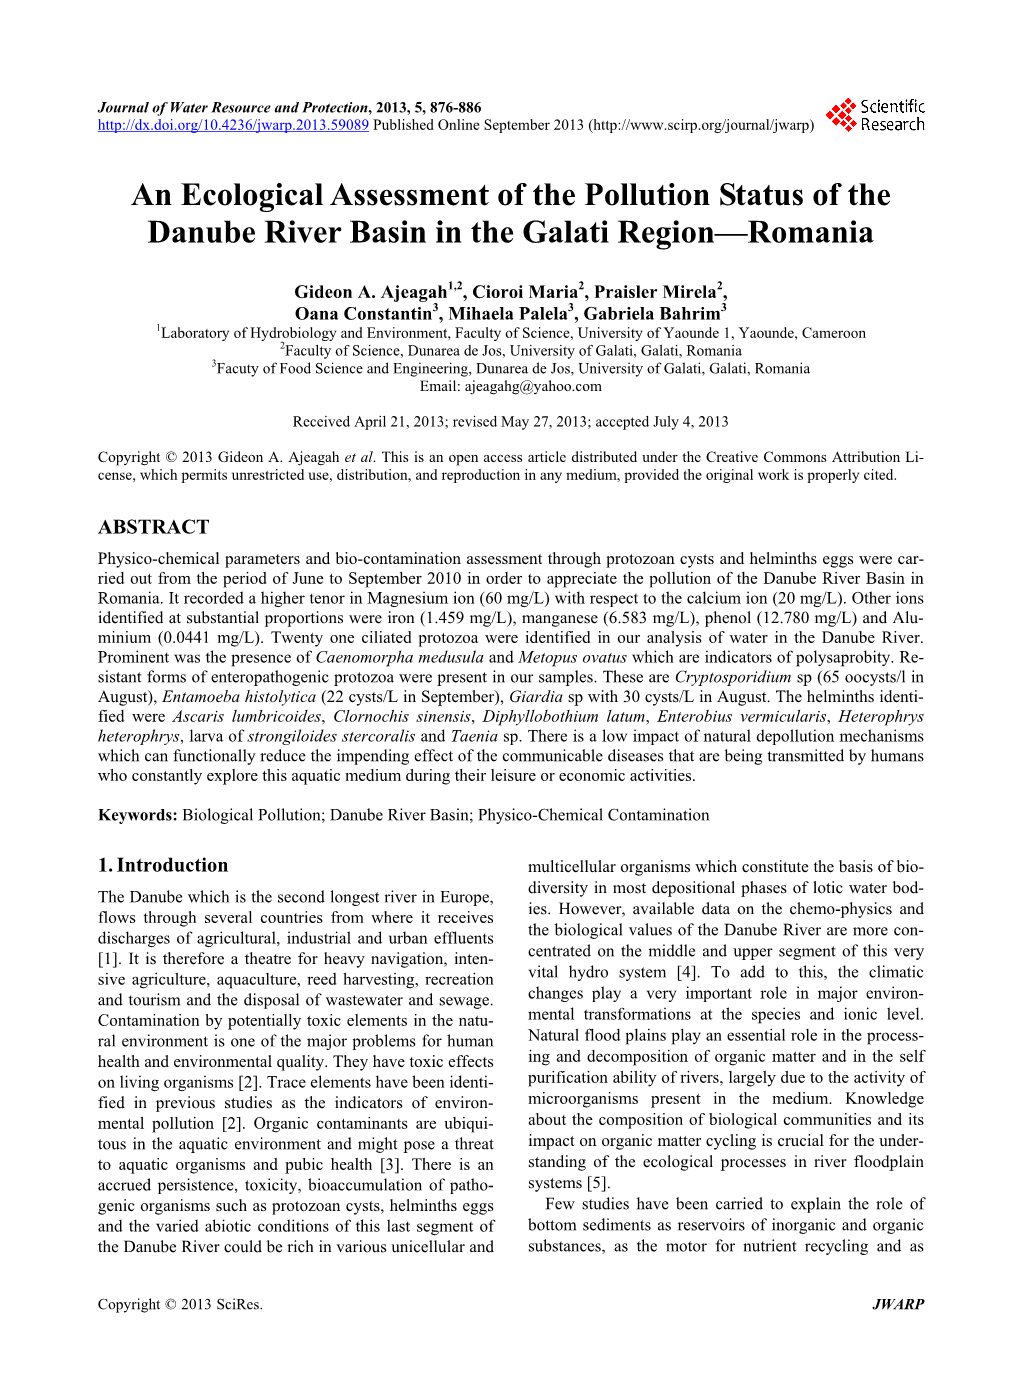 An Ecological Assessment of the Pollution Status of the Danube River Basin in the Galati Region—Romania